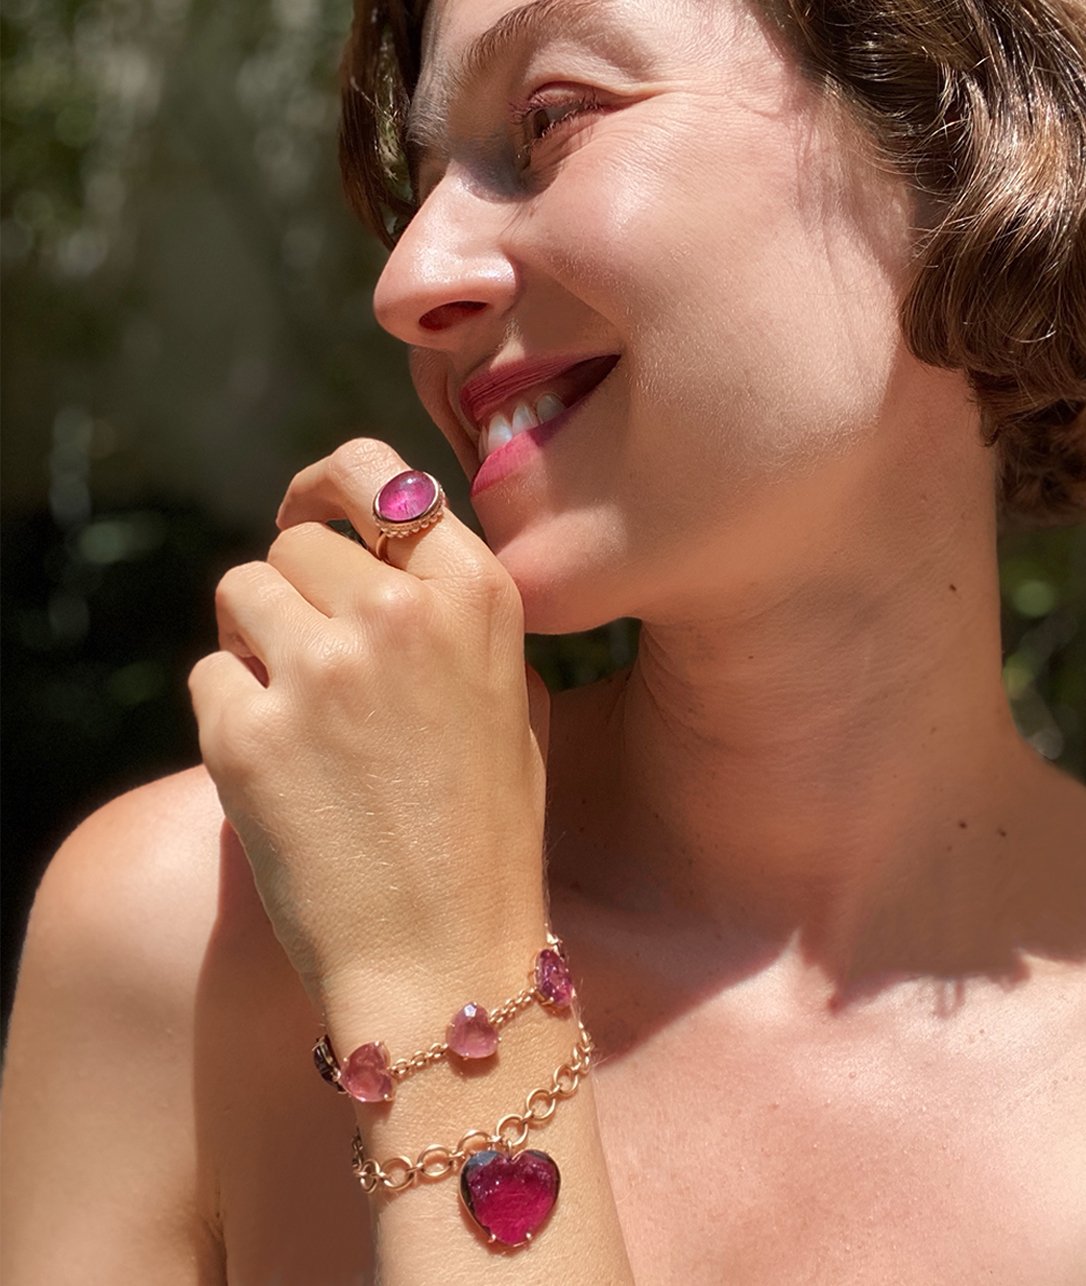 The sweetest pink tourmaline hearts we ever did see are even better worn together.